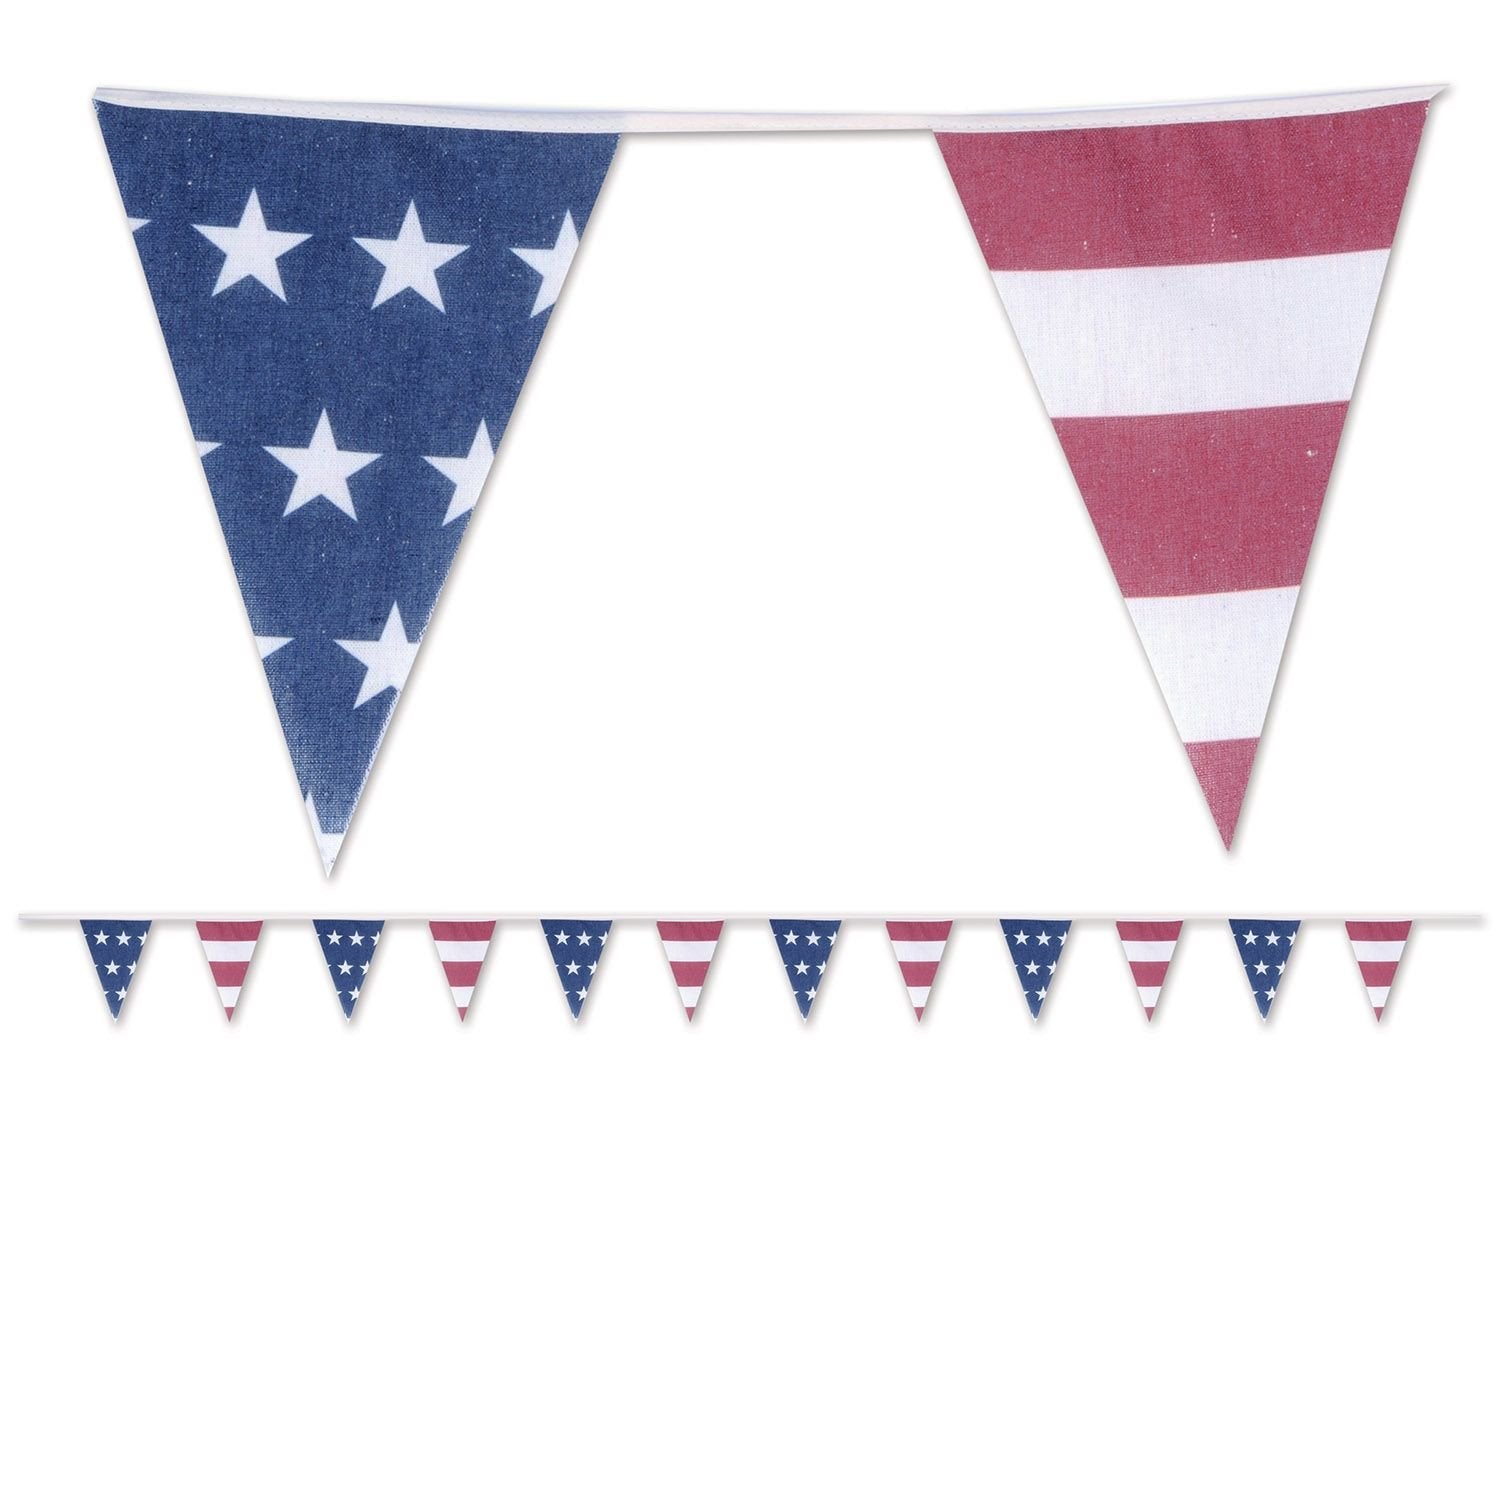 Stars and Stripes Pennant Flags